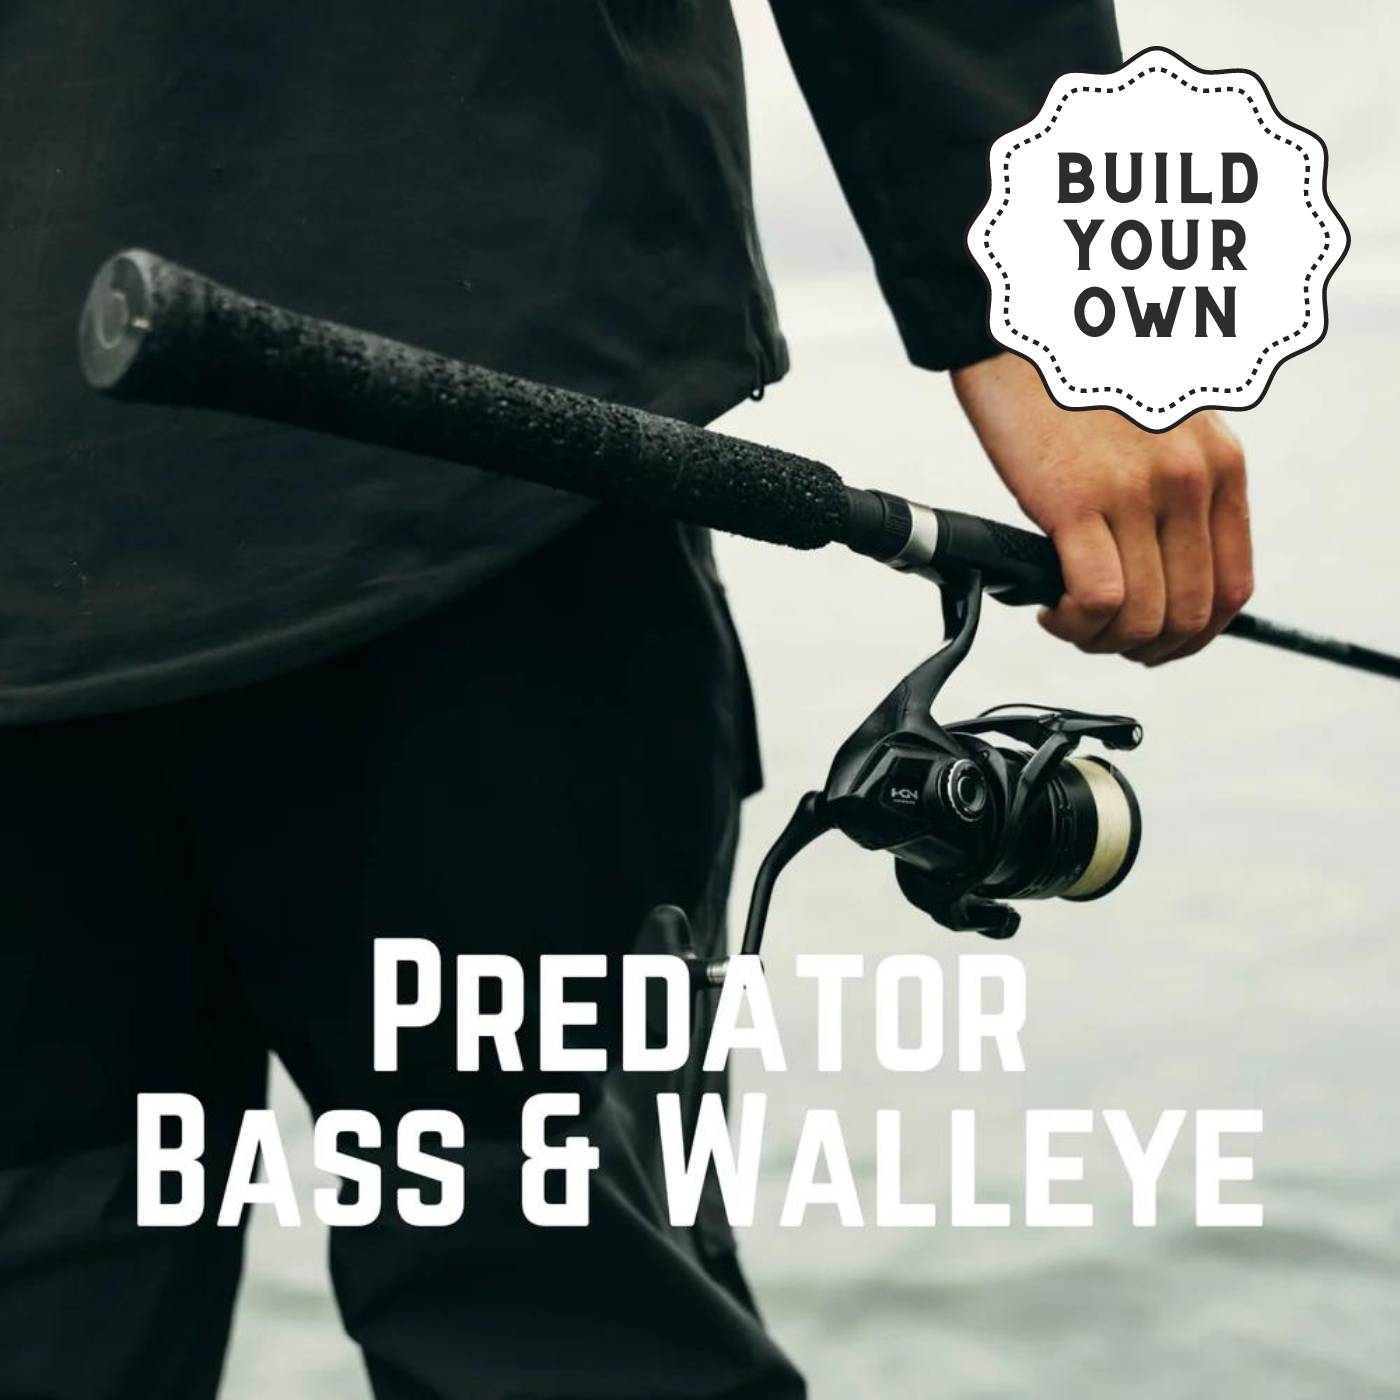 Best Fishing Rods: Our Top Picks 2023 - Coarse Fishing Tips